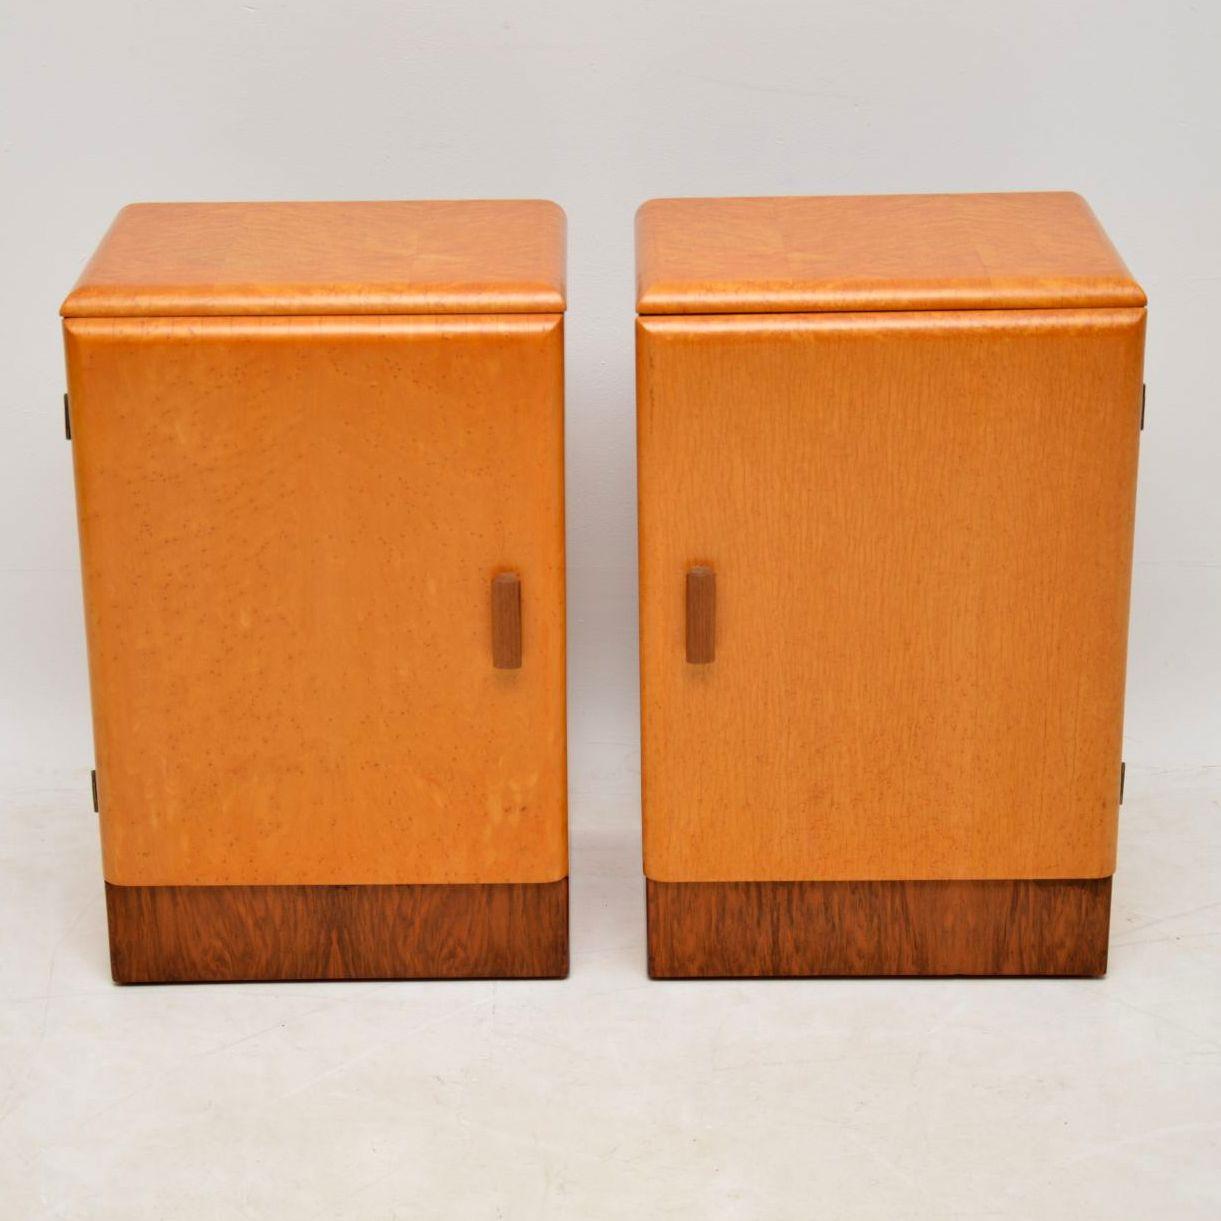 A stylish and well made pair of Art Deco bedside cabinets predominantly in bird's-eye maple, with walnut bases and handles, these date from circa 1930s-1950s. These are a great size, have a beautiful color and lovely grain patterns. We have had